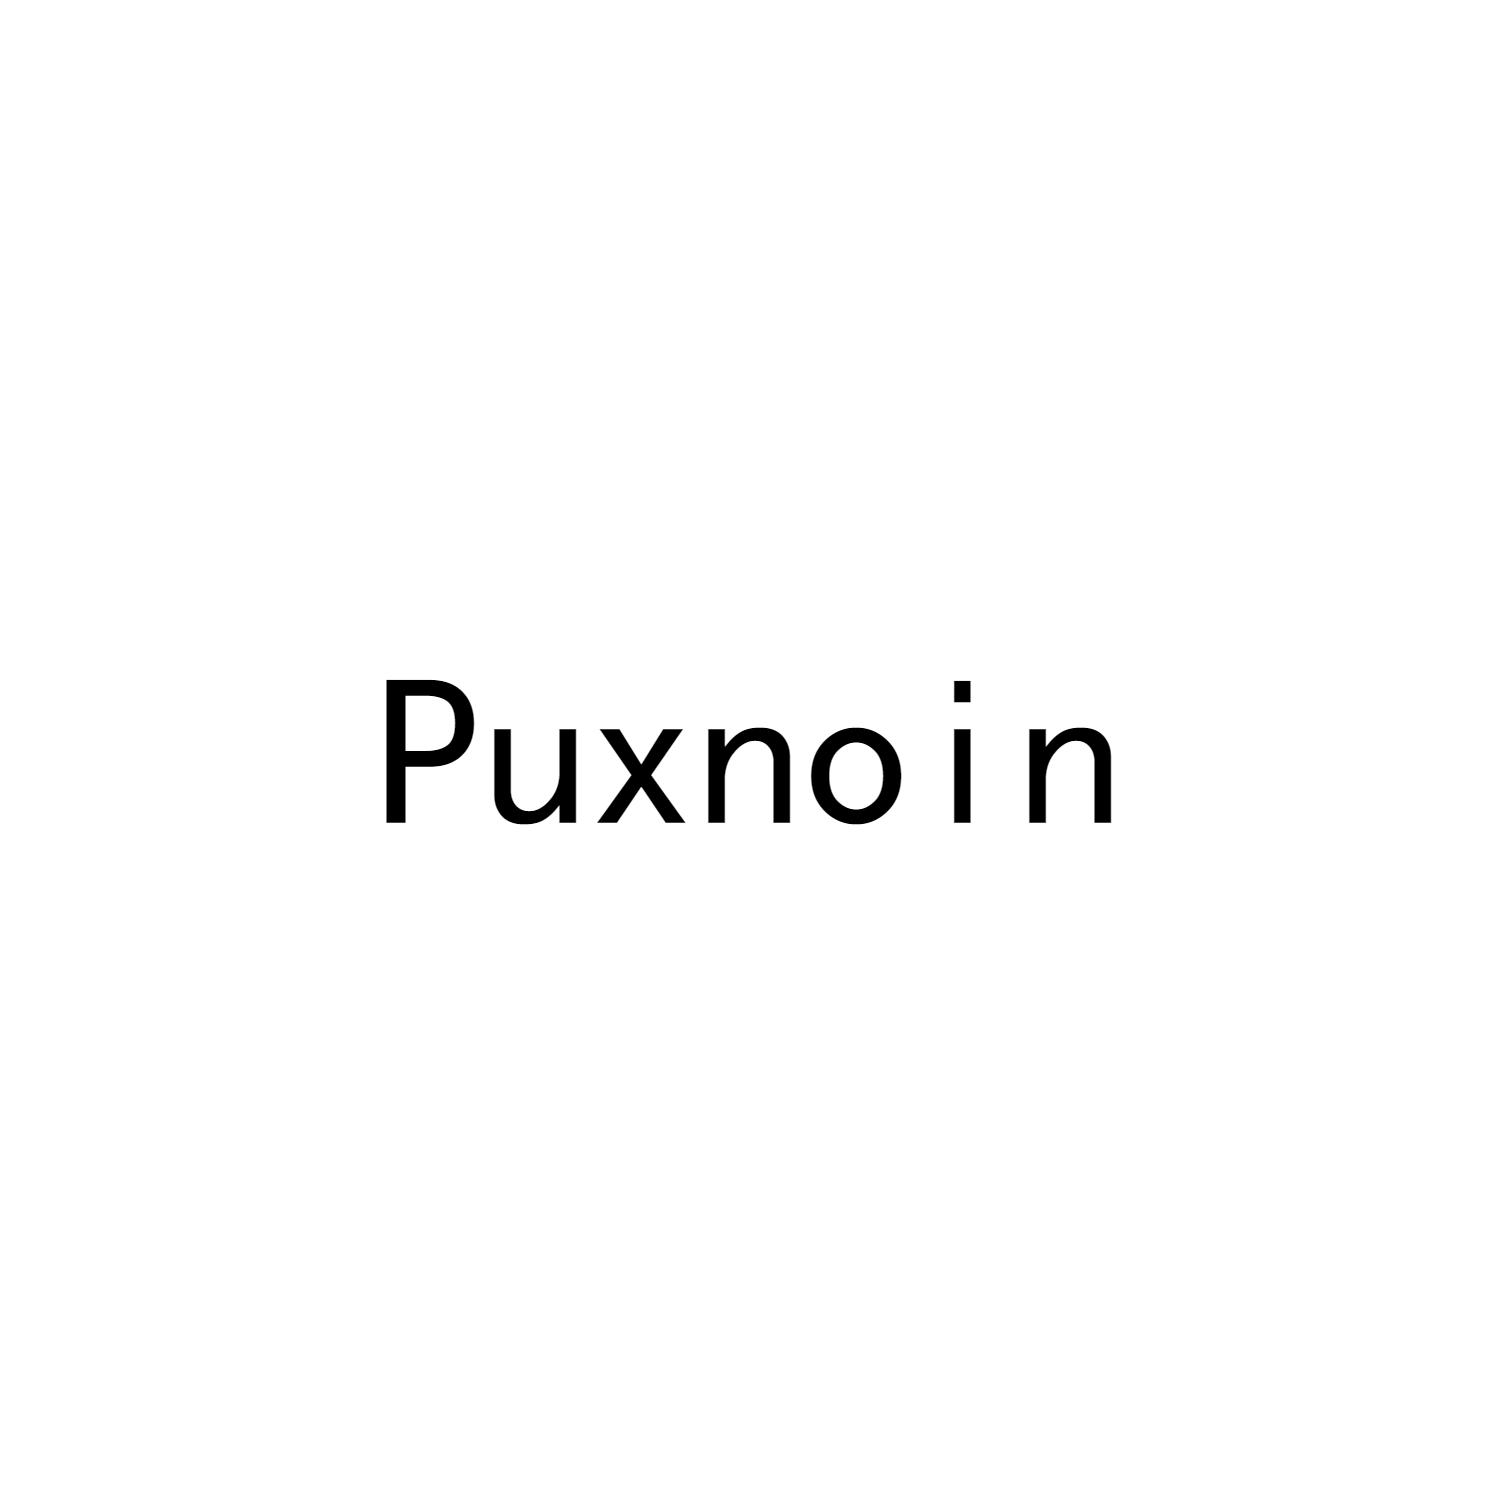 PUXNOIN